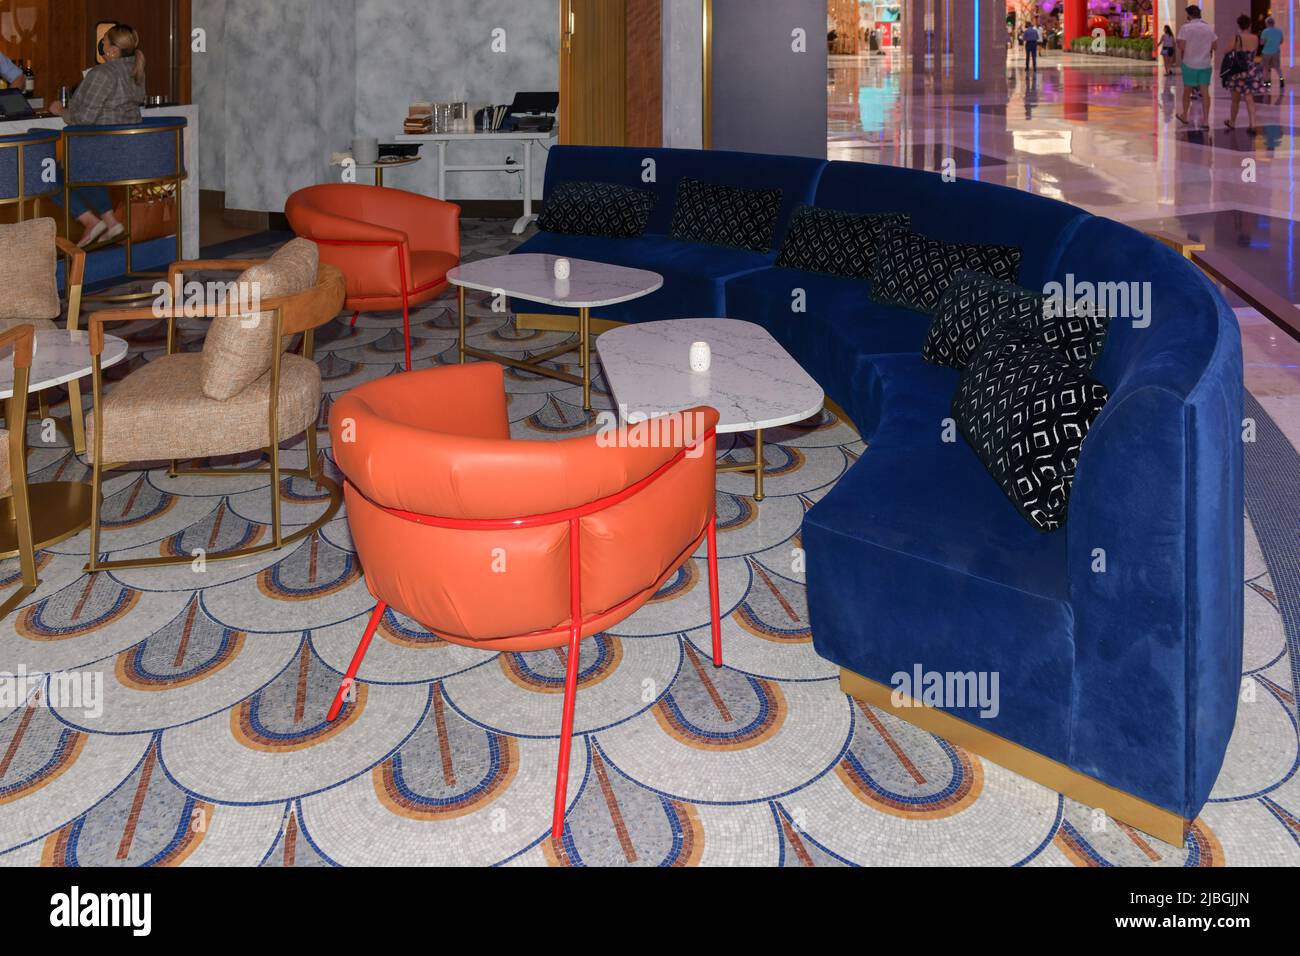 Nevada USA Sep 5, 2021 Comfortable seating is part of the furnishings at Brezza Italian restaurant located in The District at Resorts World Las Vegas Stock Photo